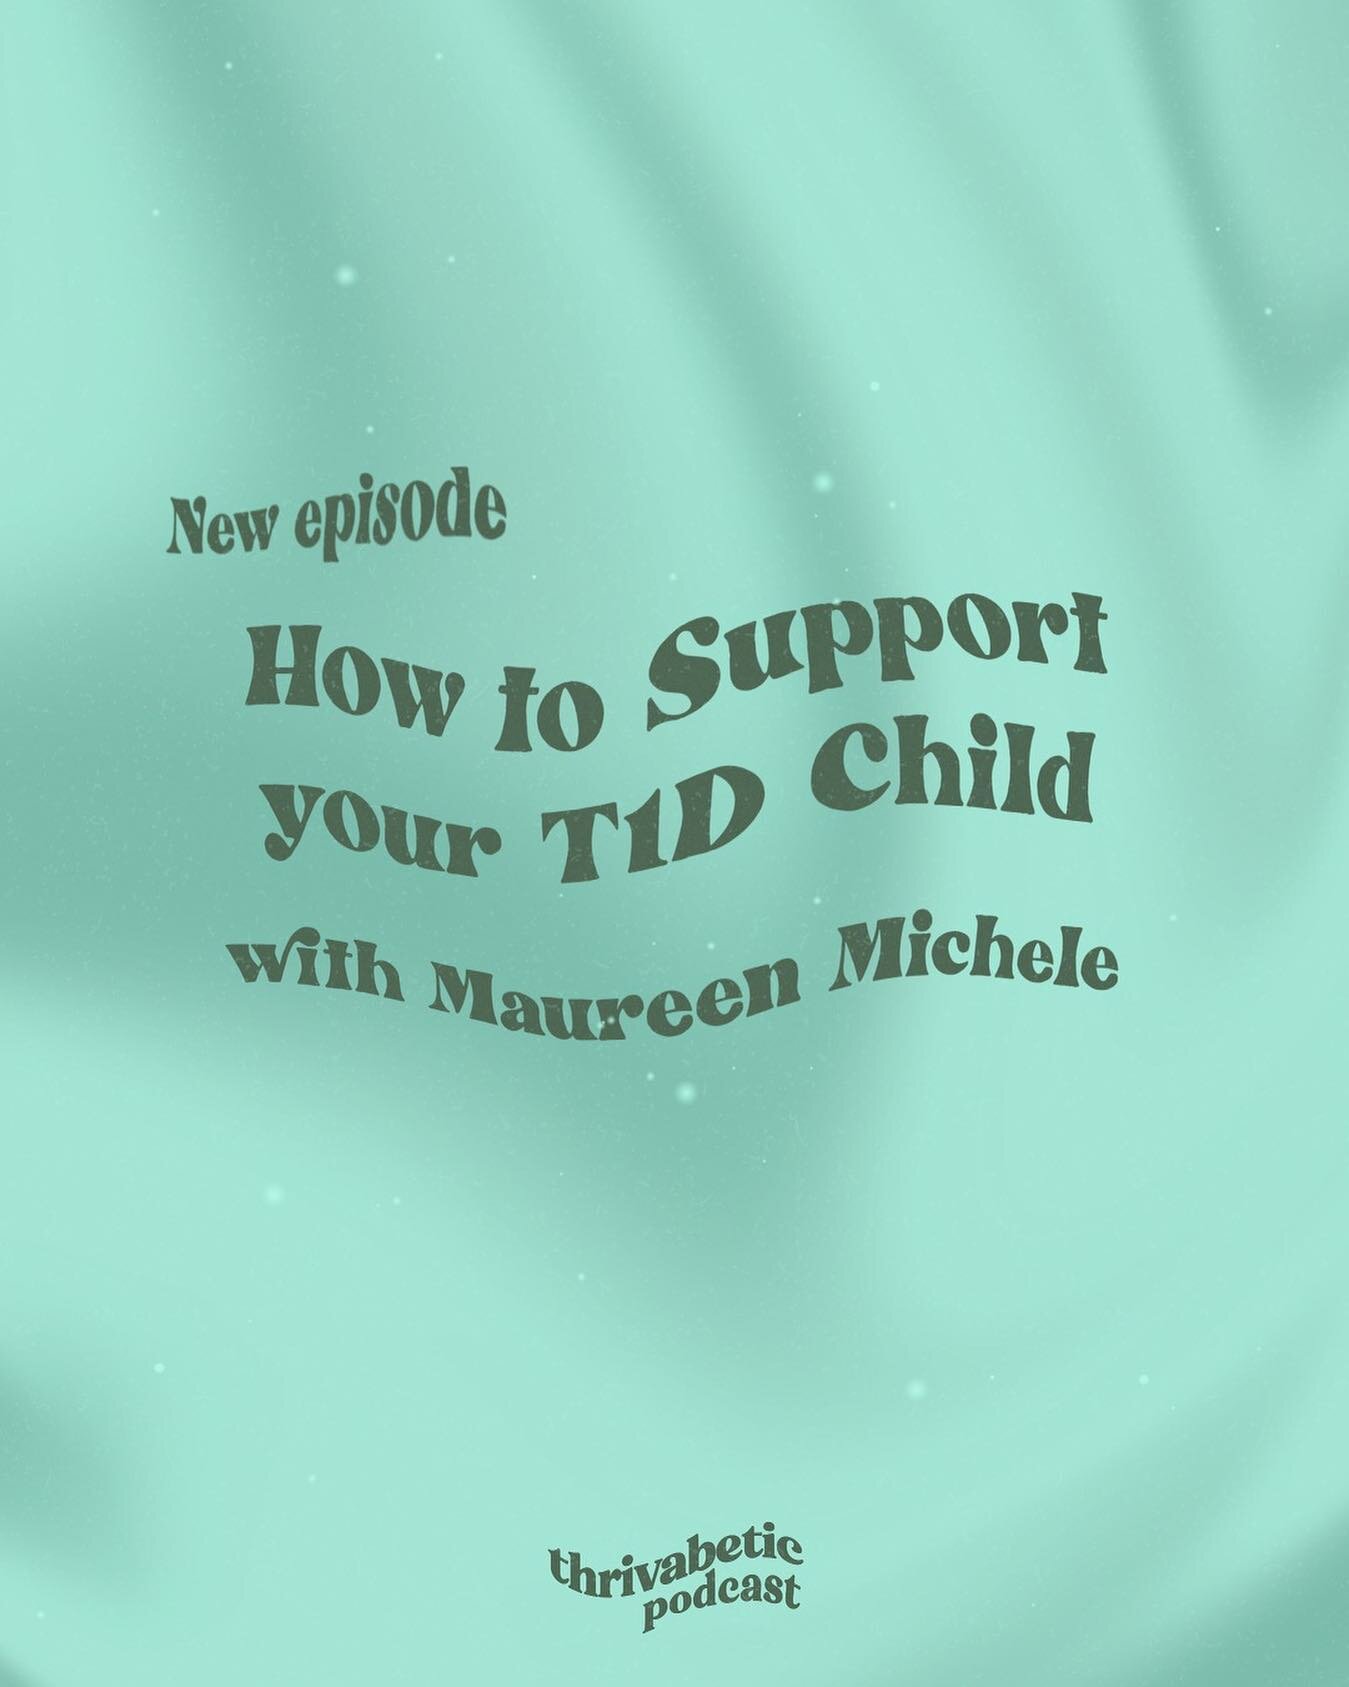 New episode with Maureen Michele, MD is now available! Maureen shares her experience as a mom and pediatrician watching her child survive cancer and later on face a Type 1 Diabetes diagnosis. We dive into how to talk to/support your child, mindset, b